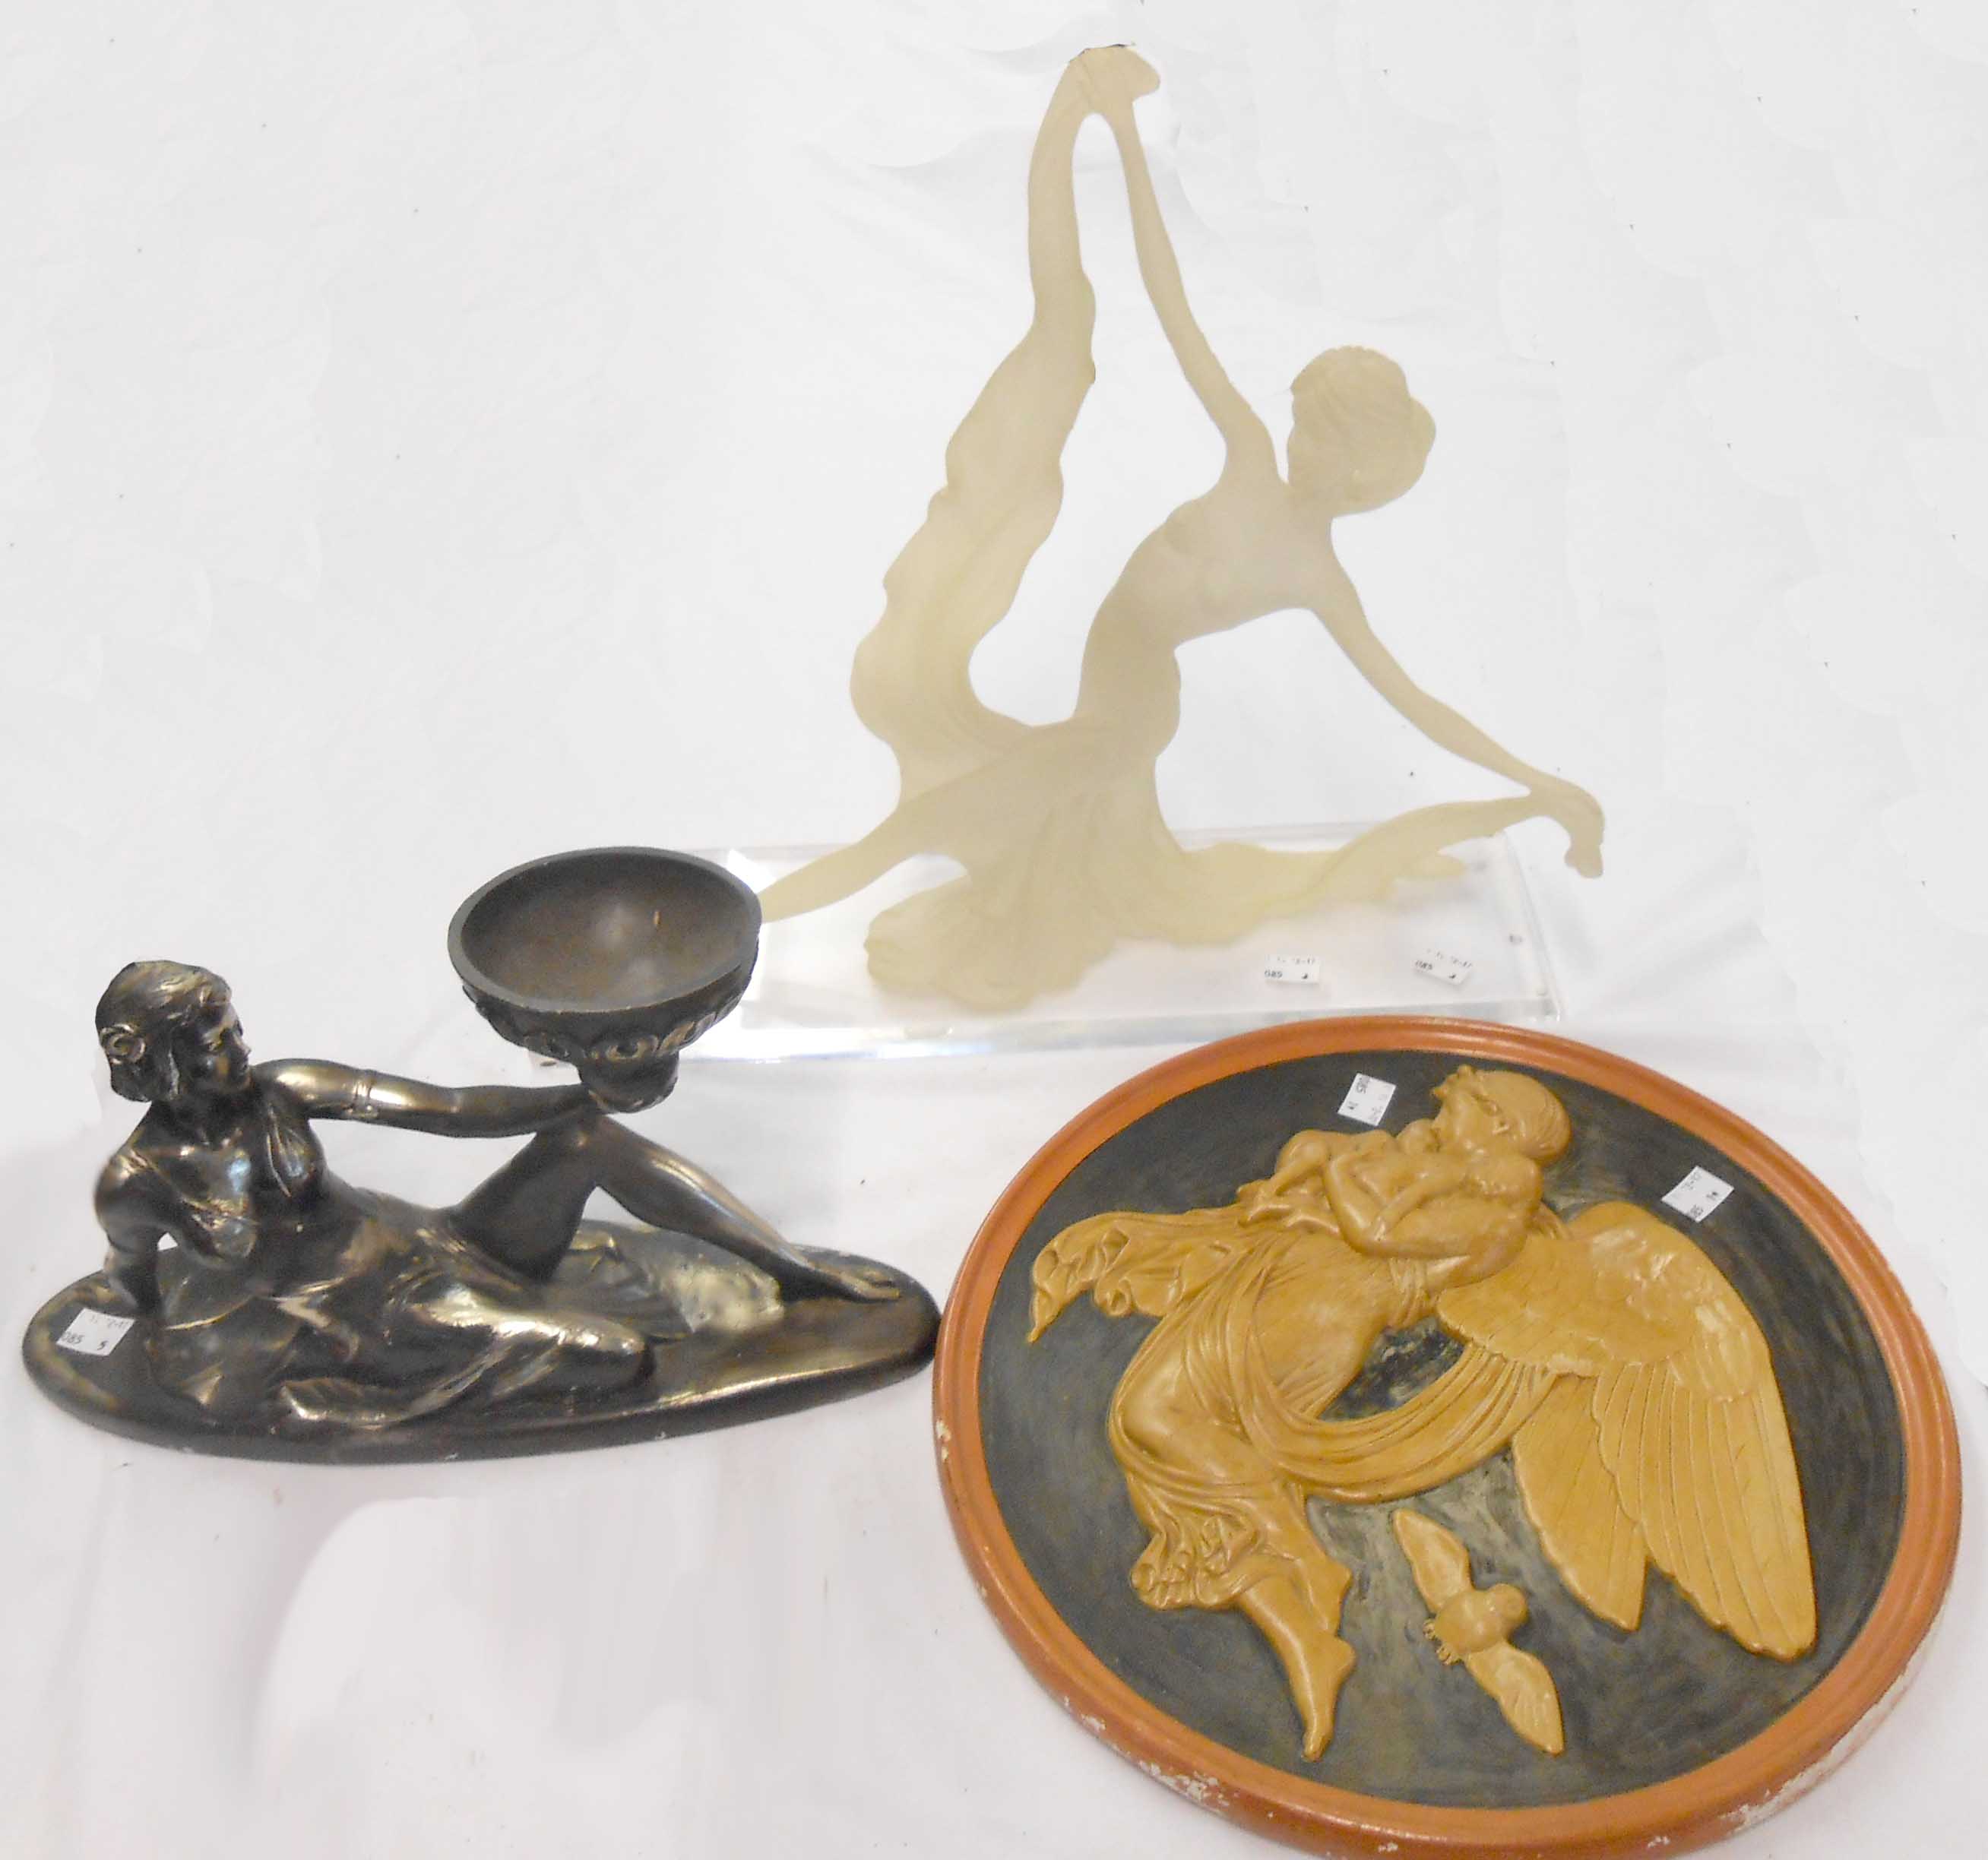 A plaster wall plaque with angel and owl decoration - sold with two resin Art Deco style figures (